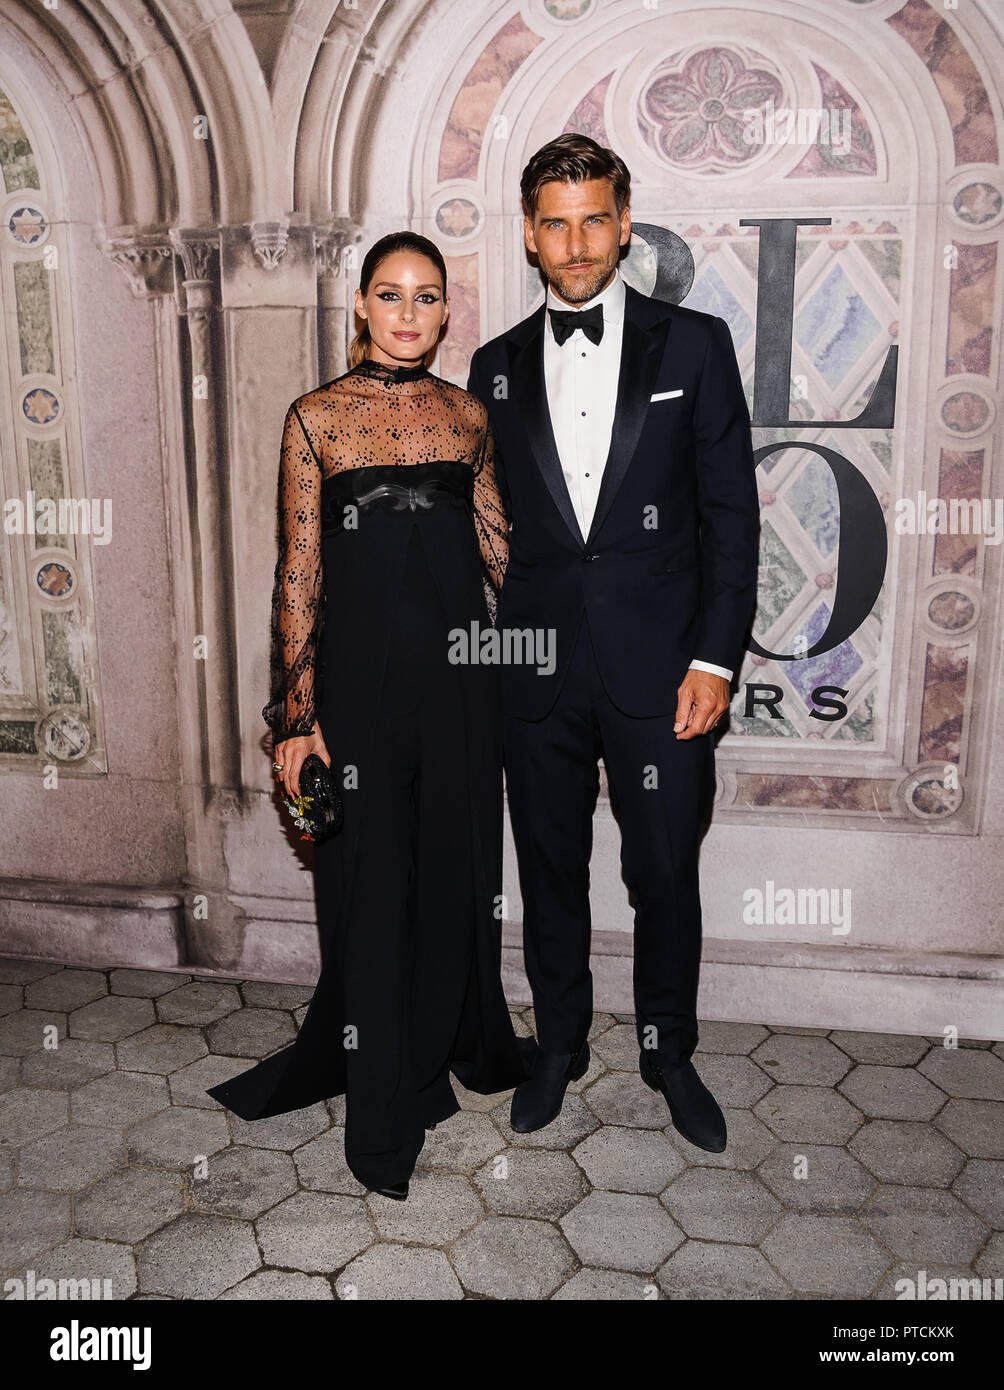 Ralph Lauren 50th Anniversary Event at Bethesda Terrace in Central Park  Featuring: Olivia Palermo, Johannes Huebl Where: New York, New York, United  States When: 07 Sep 2018 Credit: WENN.com Stock Photo - Alamy